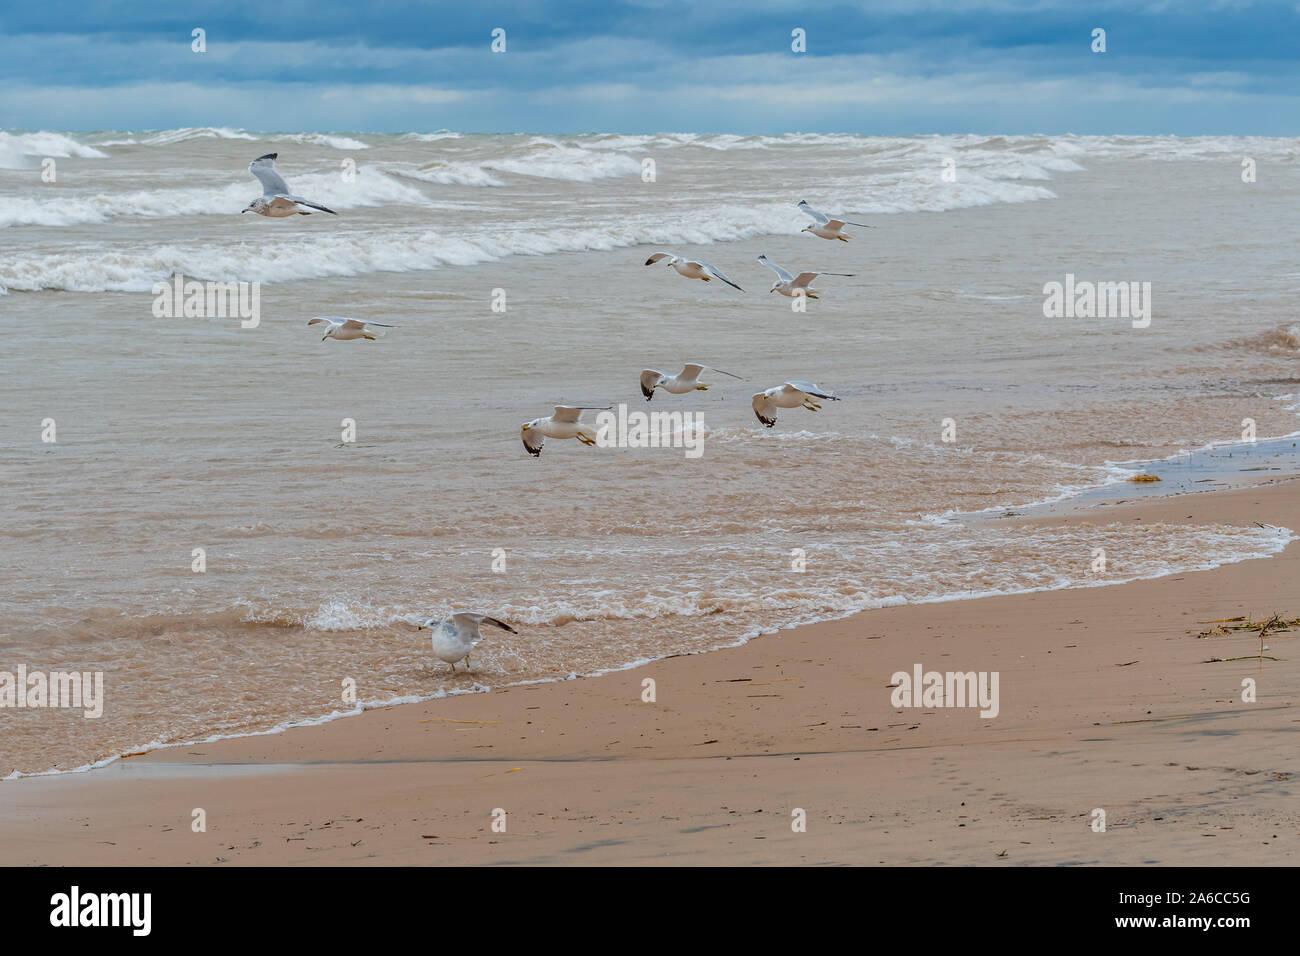 A group of ring-billed gulls (Larus delawarensis) fly over rough breaking waves on the shore of Lake Michigan in the autumn. Stock Photo